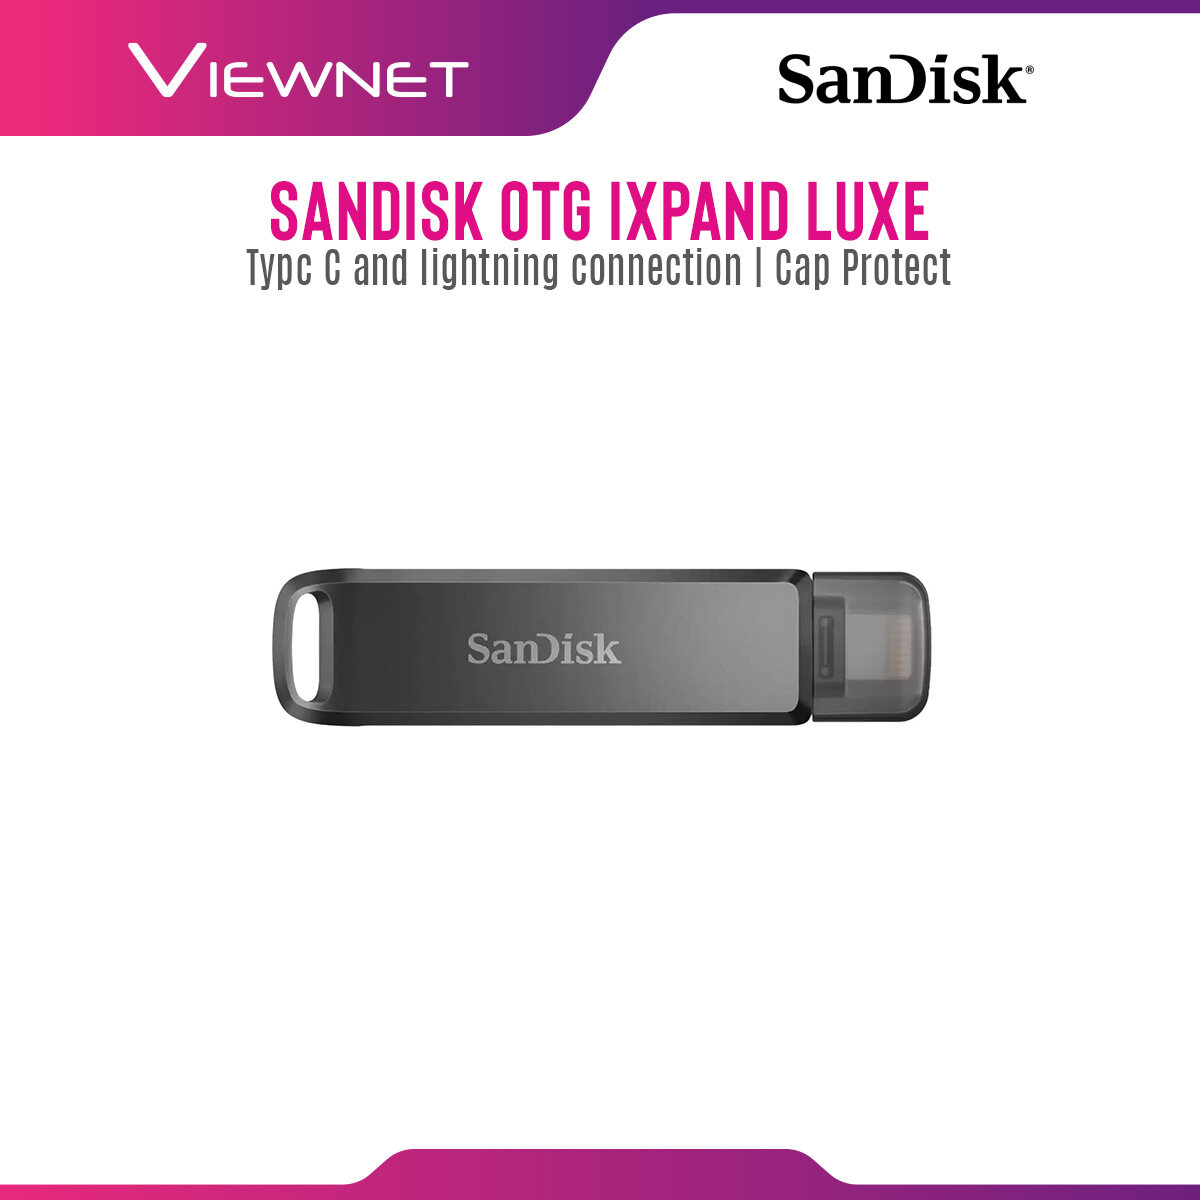 Sandisk OTG Flash Drive iXpand Luxe with Type-C and Lightning Connection, iXpand Drive App Support, Plug and Play